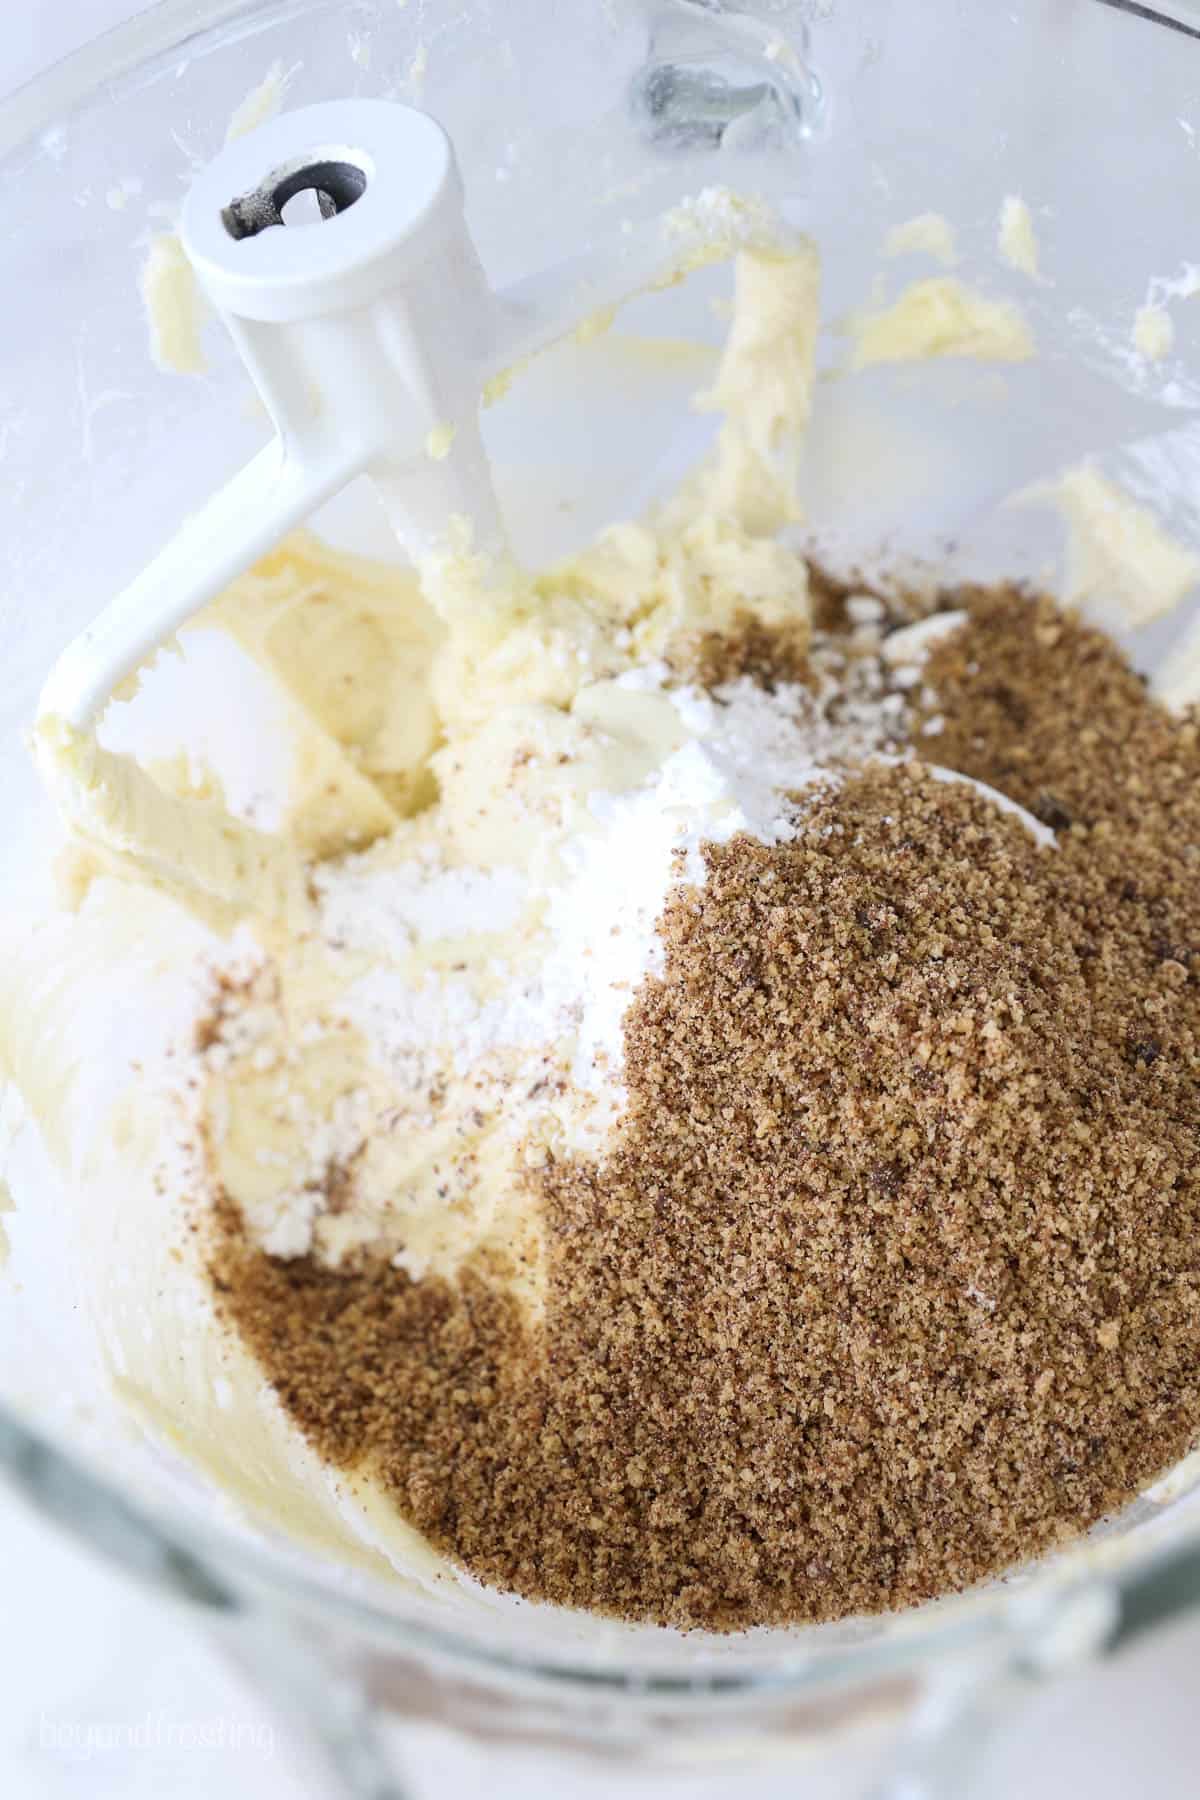 A glass mixing bowl of frosting with powdered sugar and chocolate chip cookie crumbs